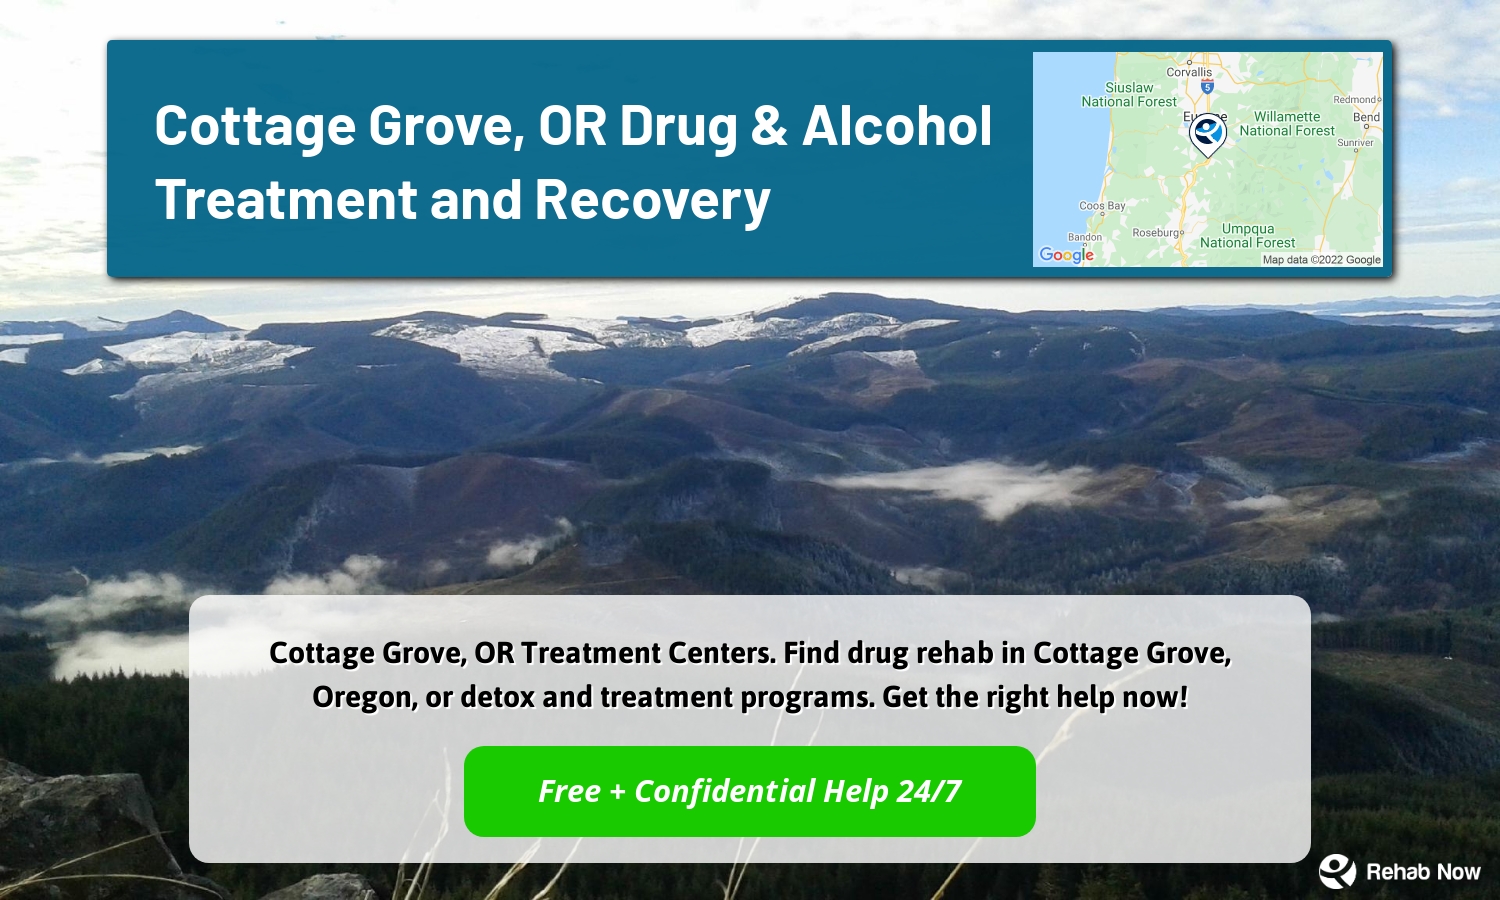 Cottage Grove, OR Treatment Centers. Find drug rehab in Cottage Grove, Oregon, or detox and treatment programs. Get the right help now!